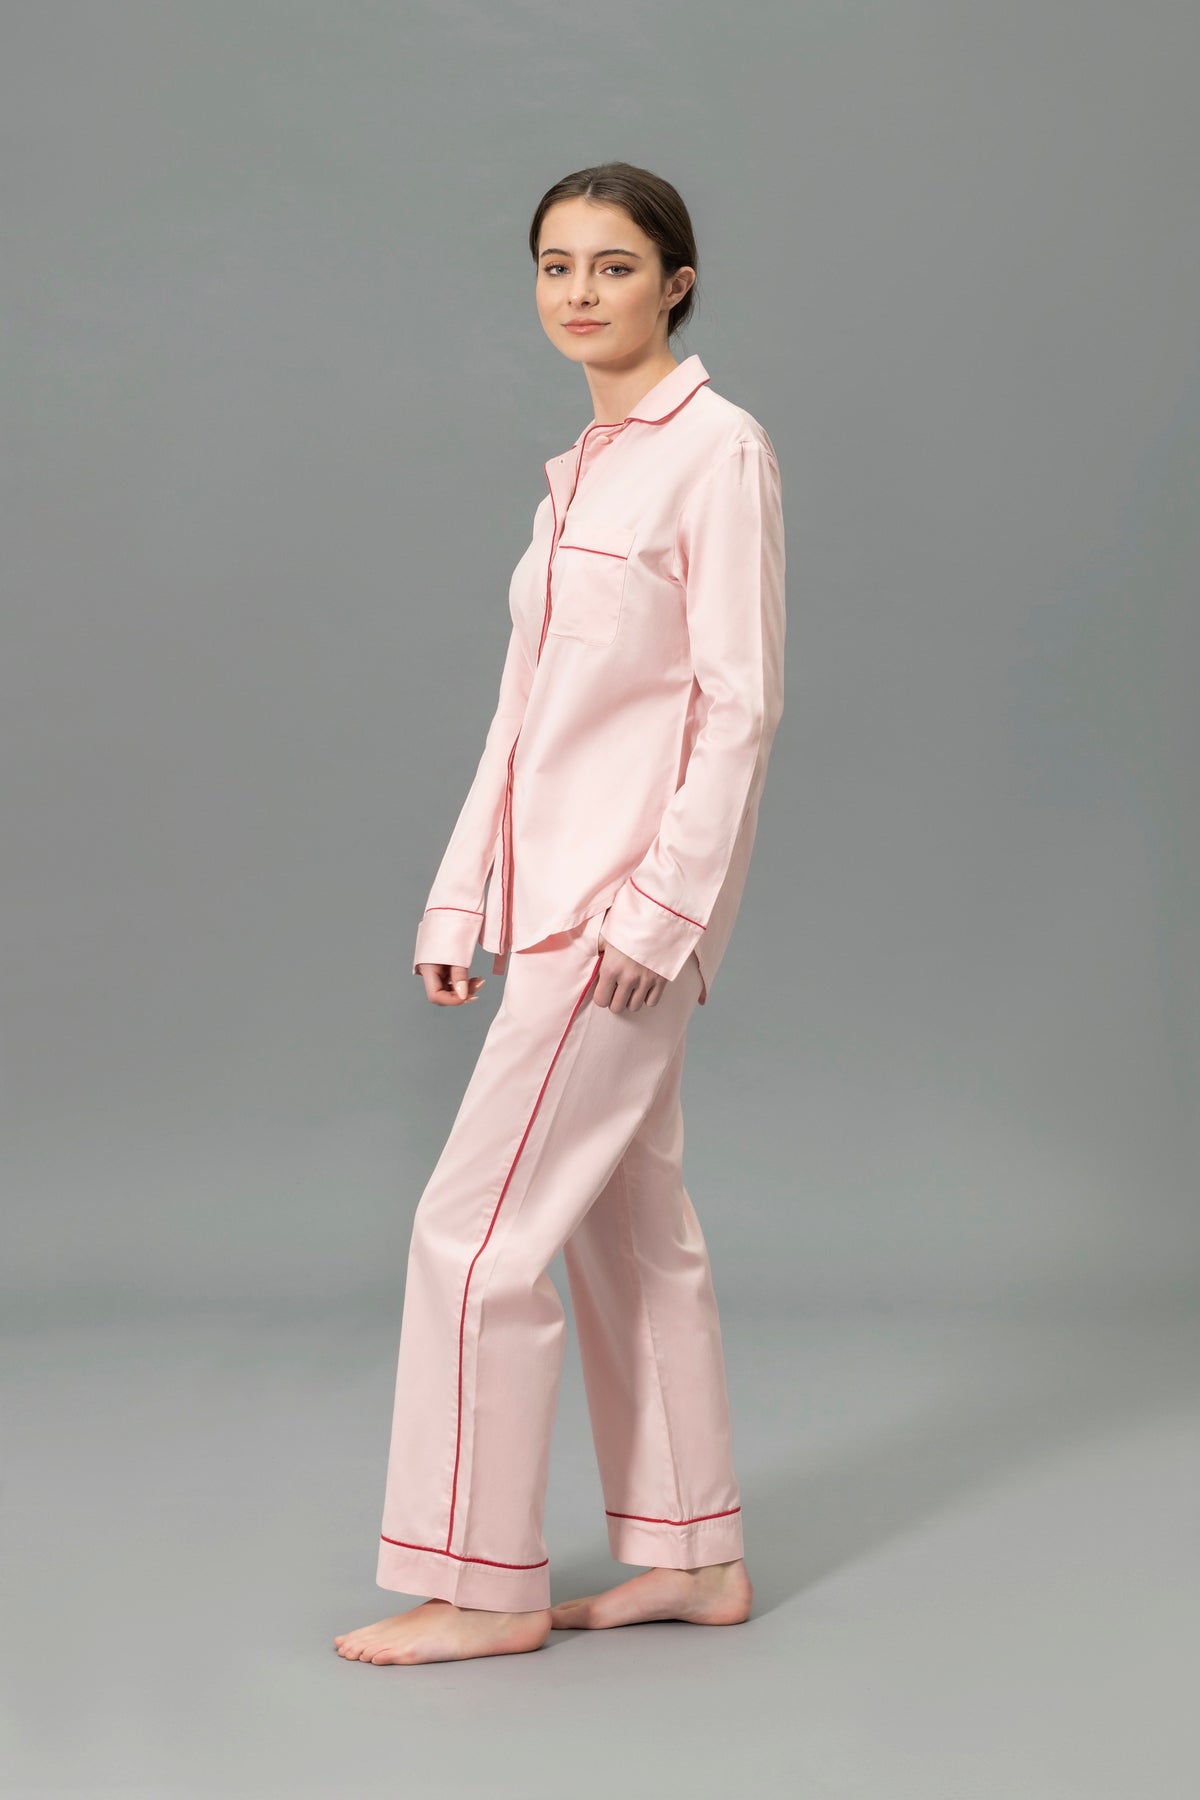 Side View of Model Wearing Matouk Nocturne Pajama Set in Color Pink and Scarlet